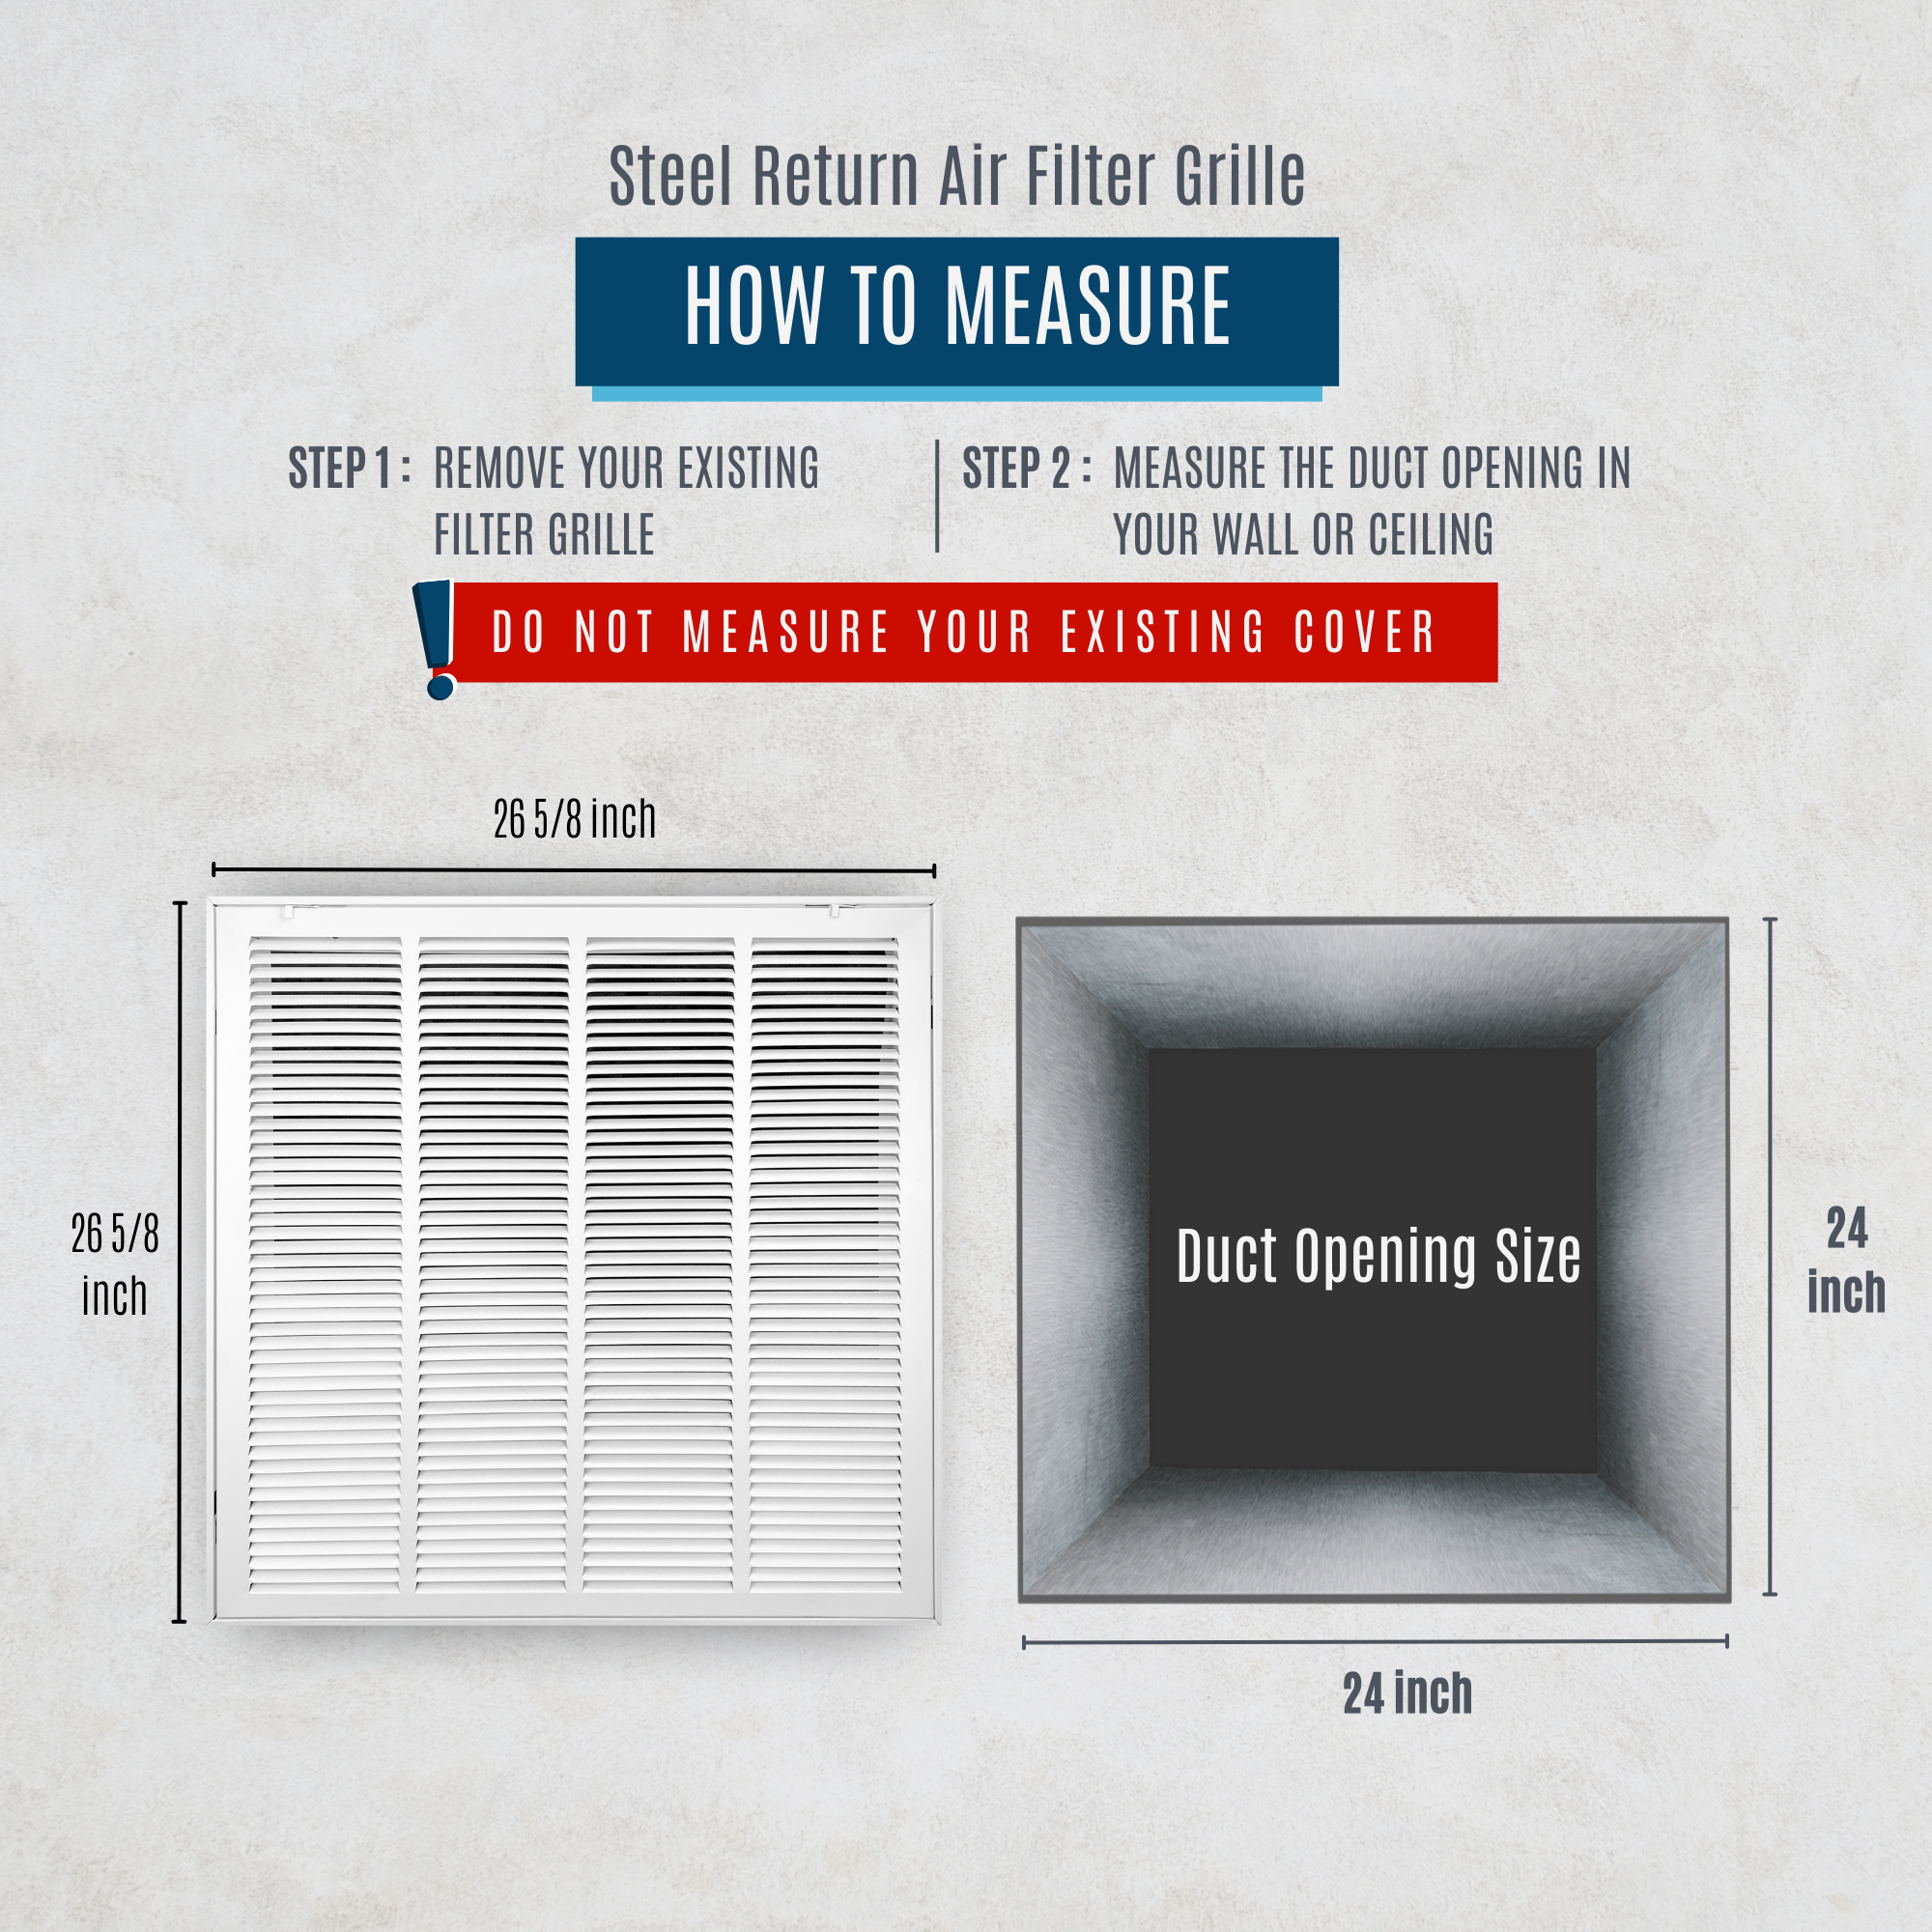 24" X 24" Duct Opening | Steel Return Air Filter Grille for Sidewall and Ceiling